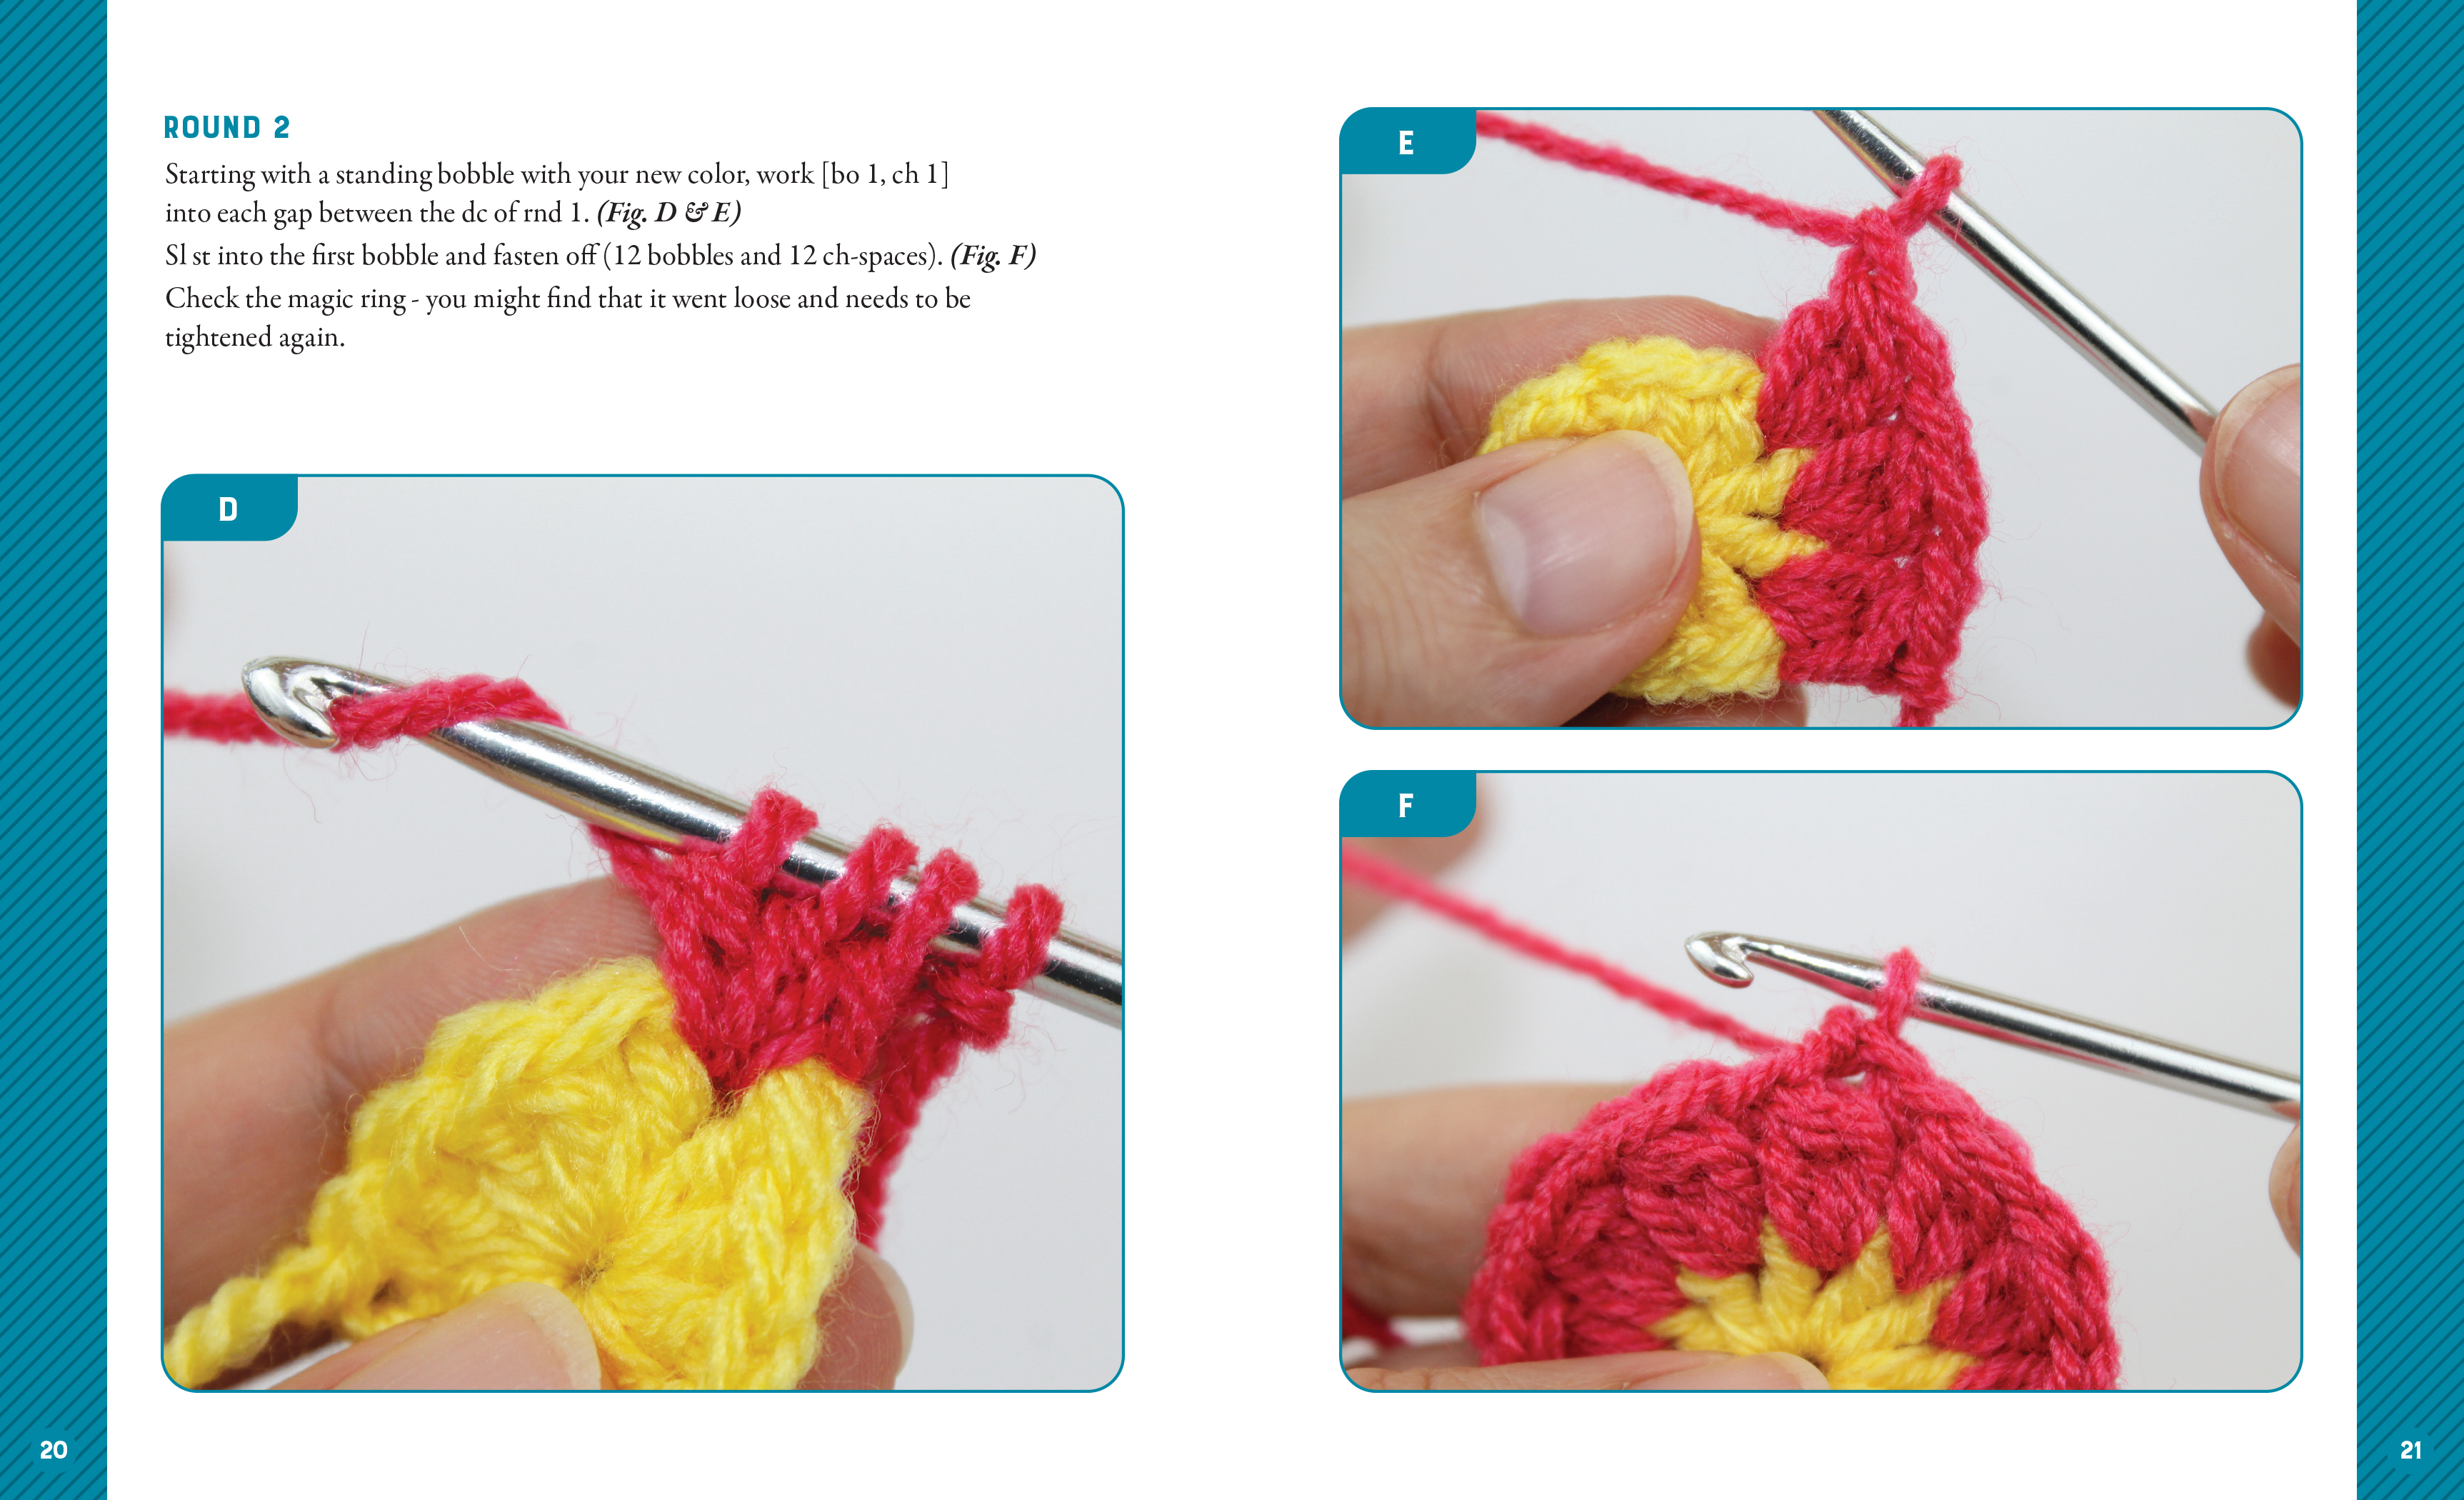 Crochet Your Own Merry and Bright Baubles